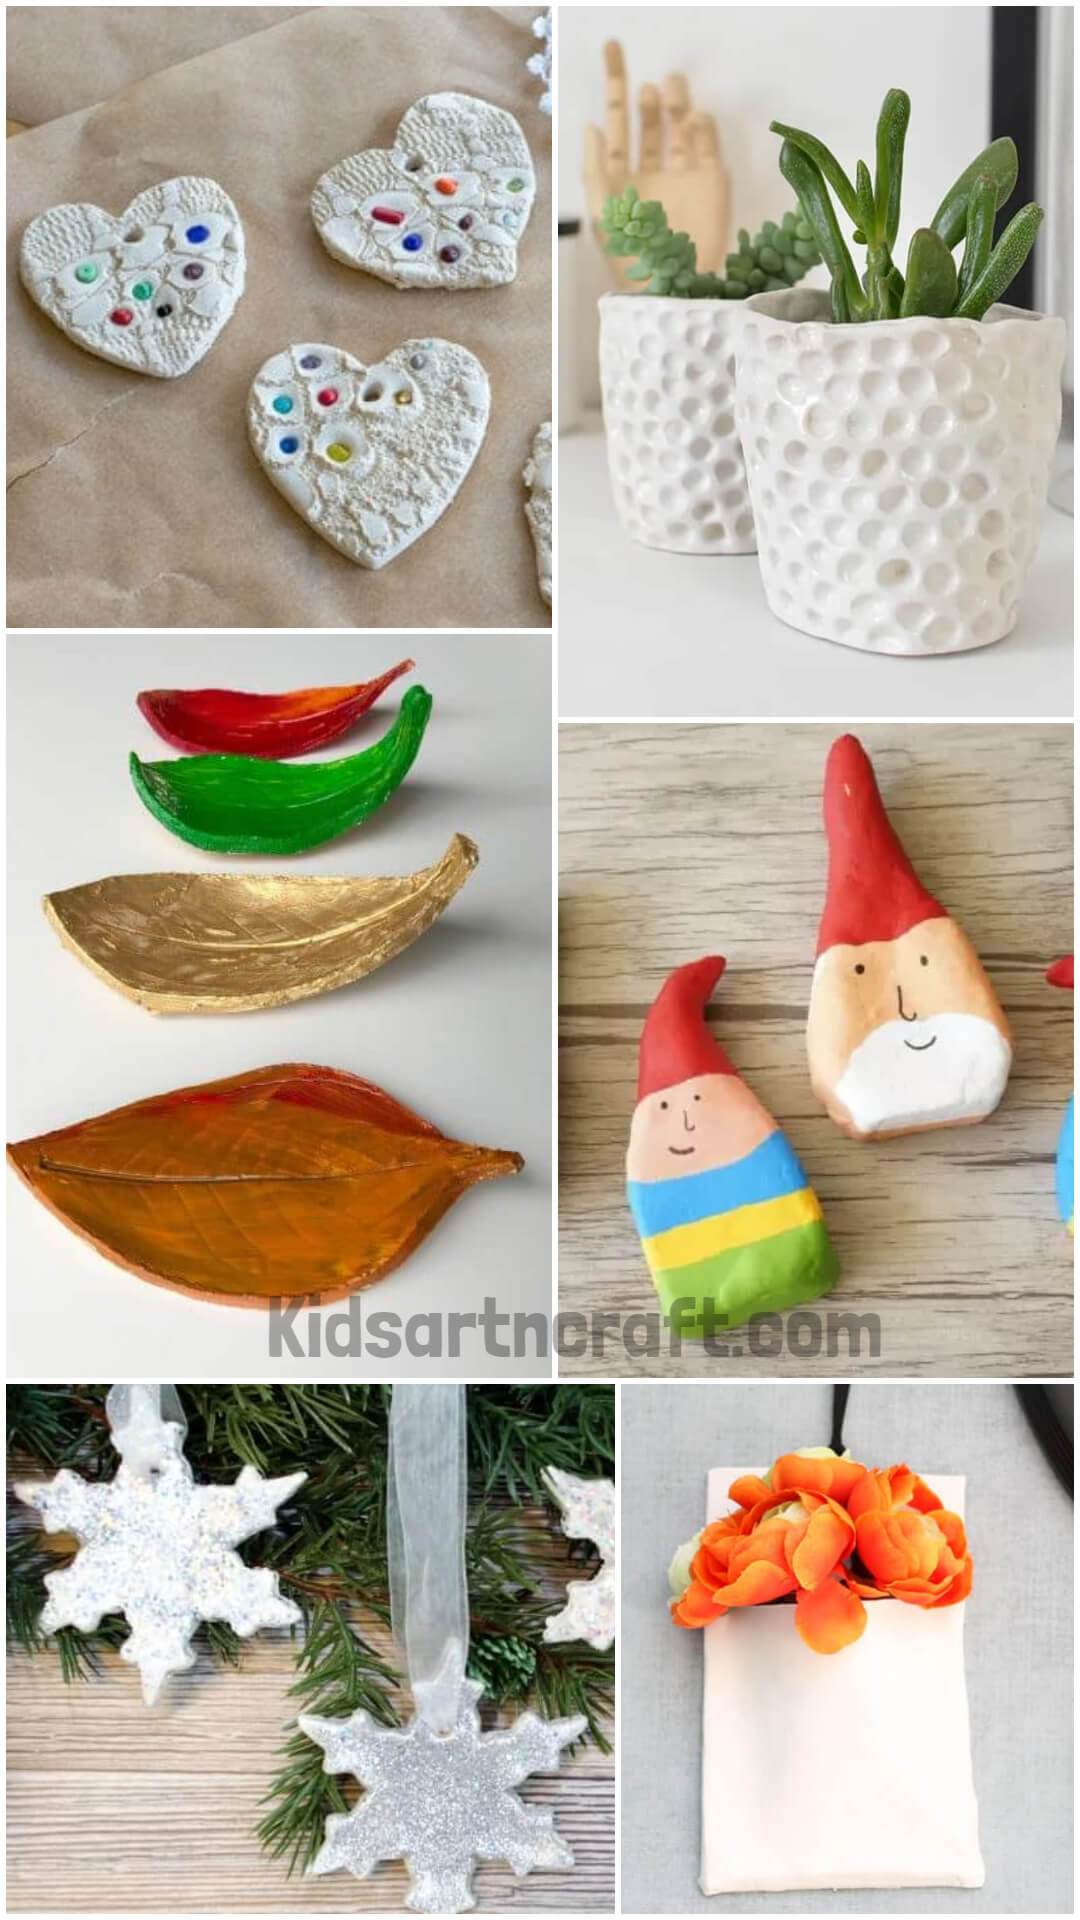 FS-Kidsartncraft-16 Amazing Air Dry Clay Crafting Ideas For Kids